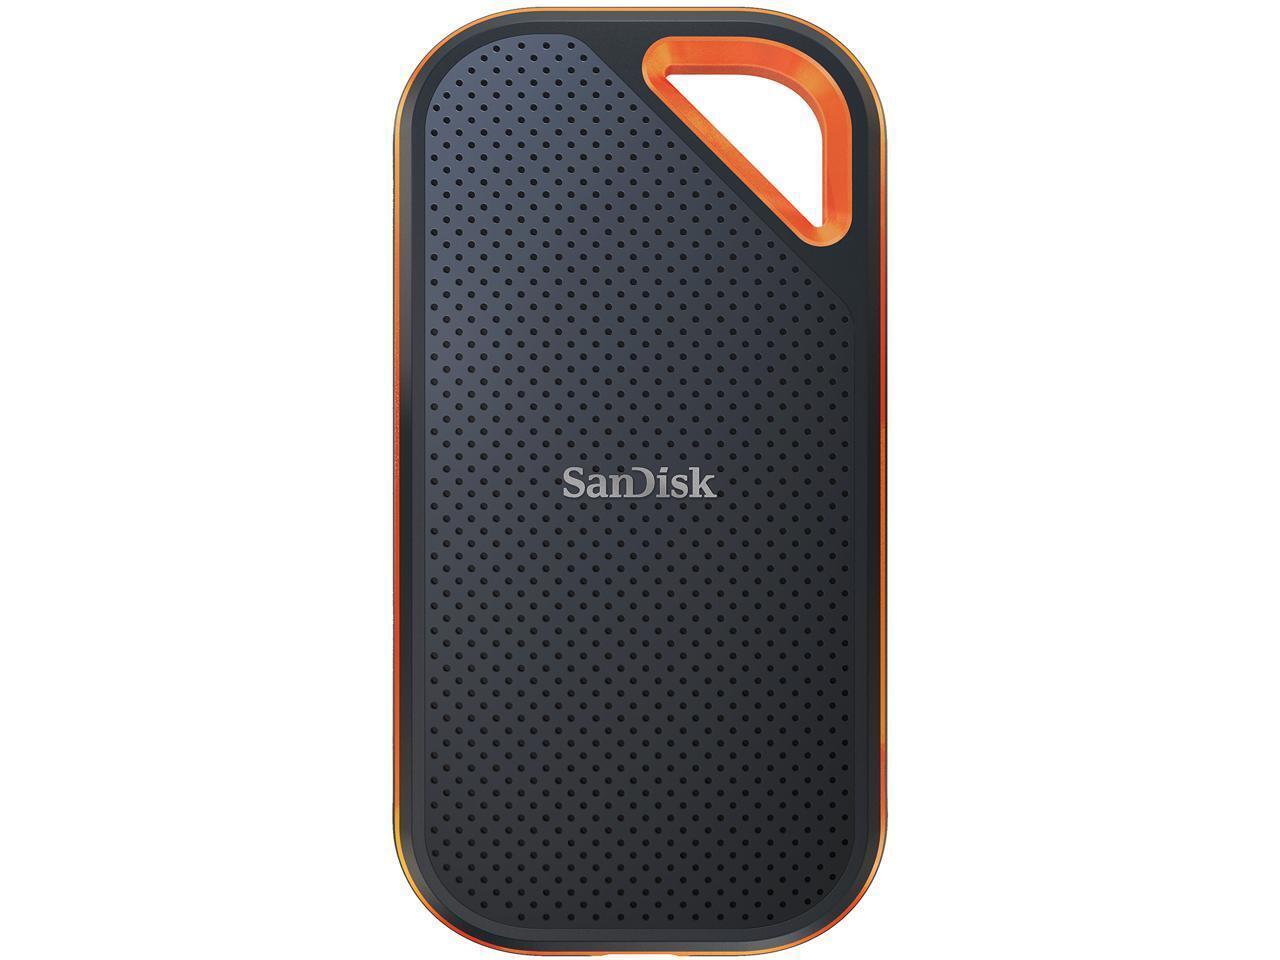 SanDisk Extreme PRO V2 Portable 4TB SSD USB 3.2 USB-C External Solid State Drive